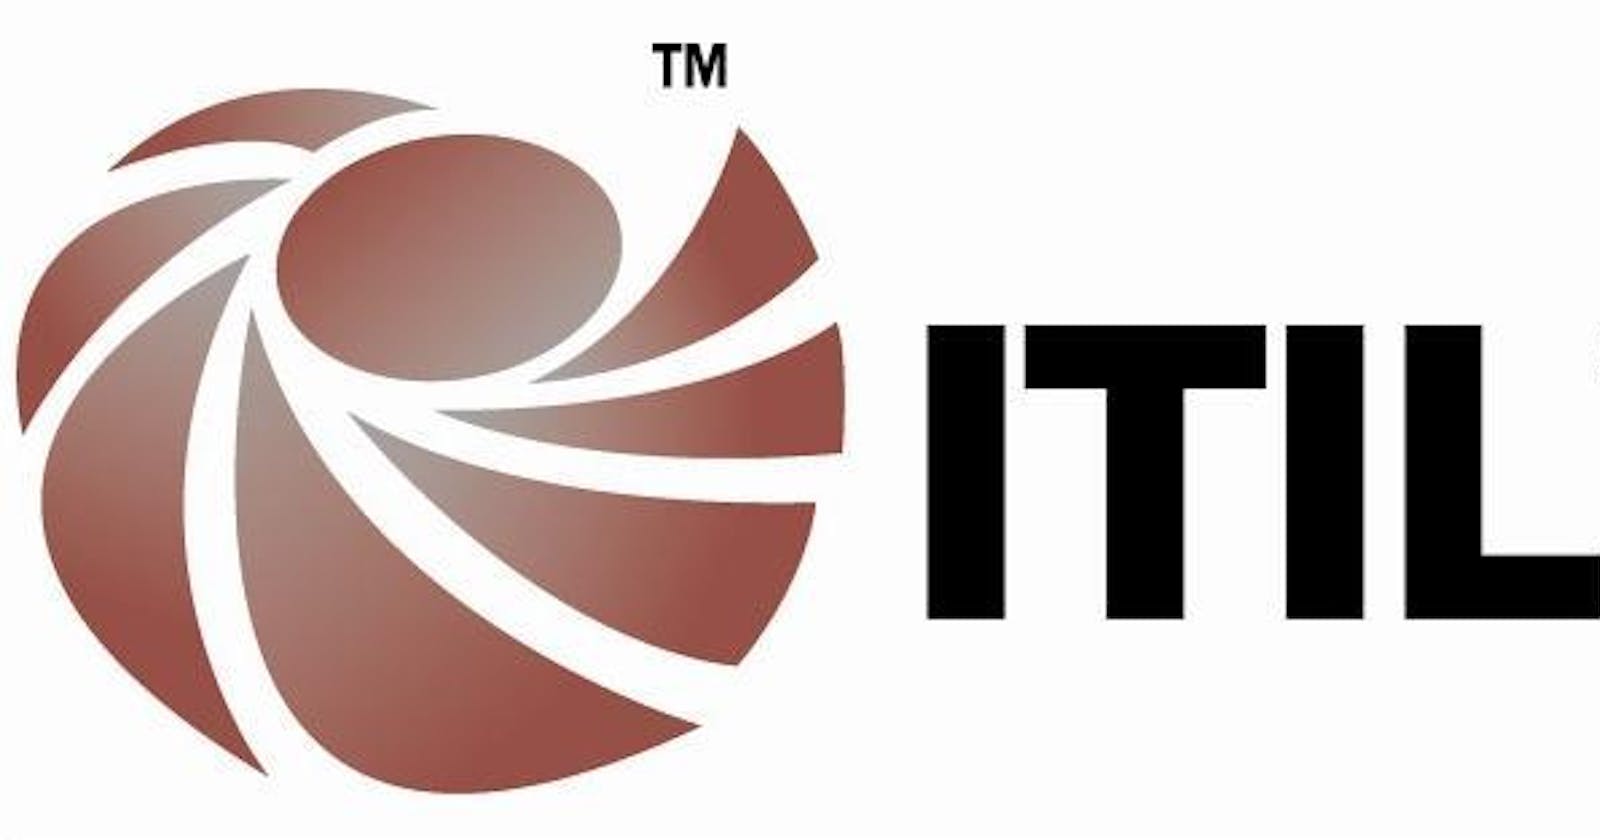 ITIL service lifecycle is explained